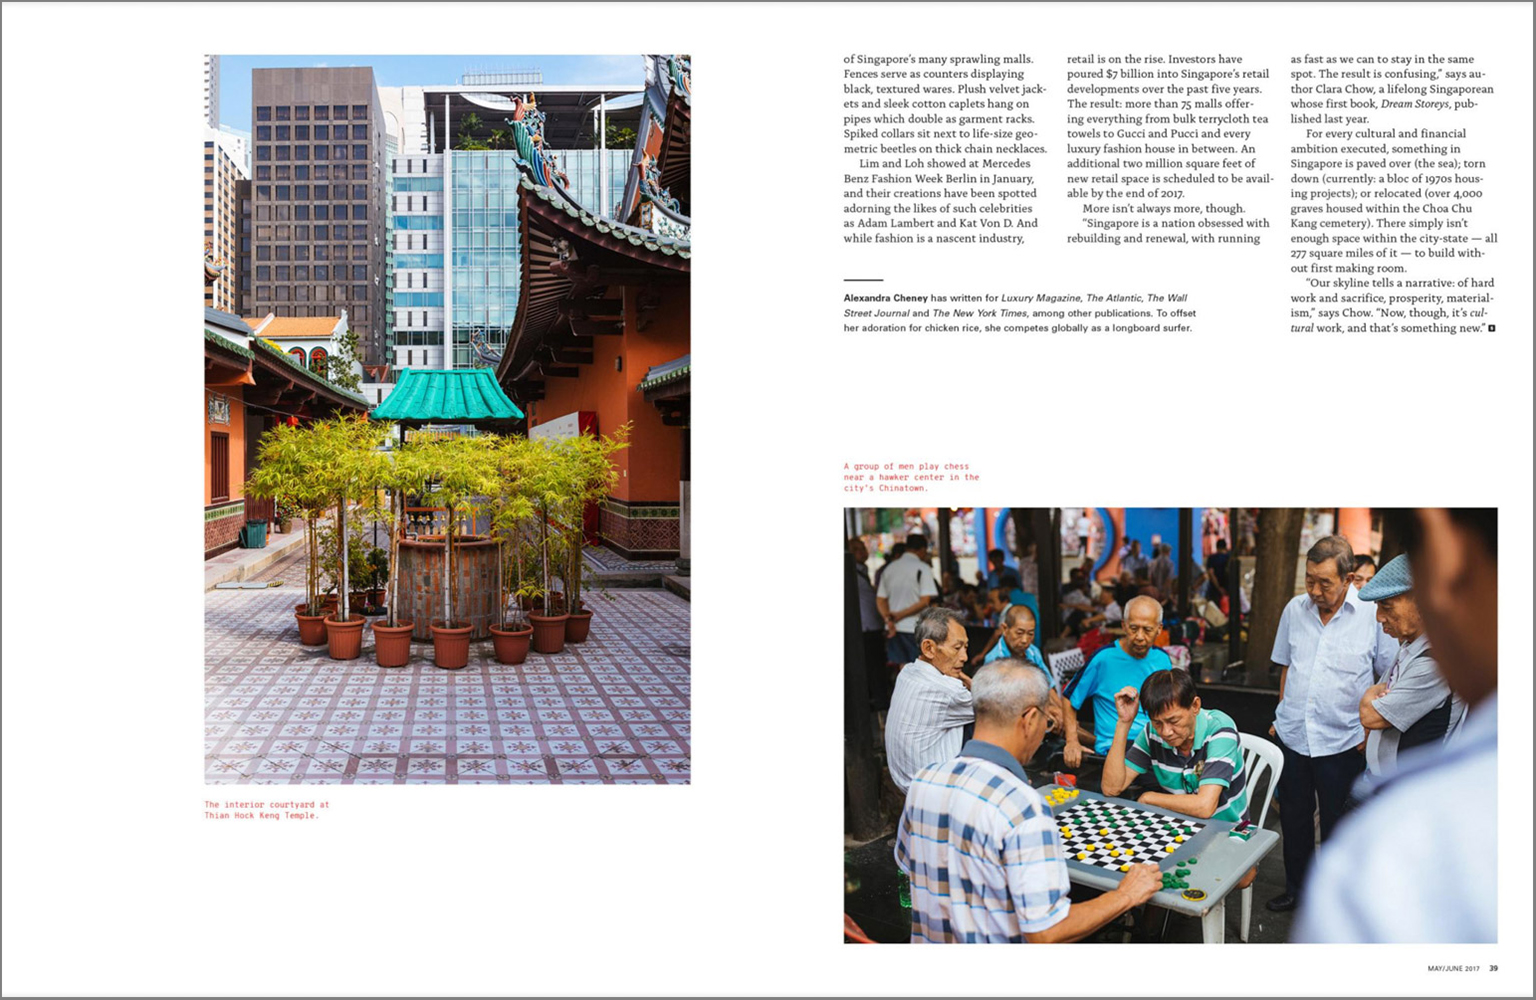 From a feature travel story on Singapore in Ethiopian Airlines magazine.